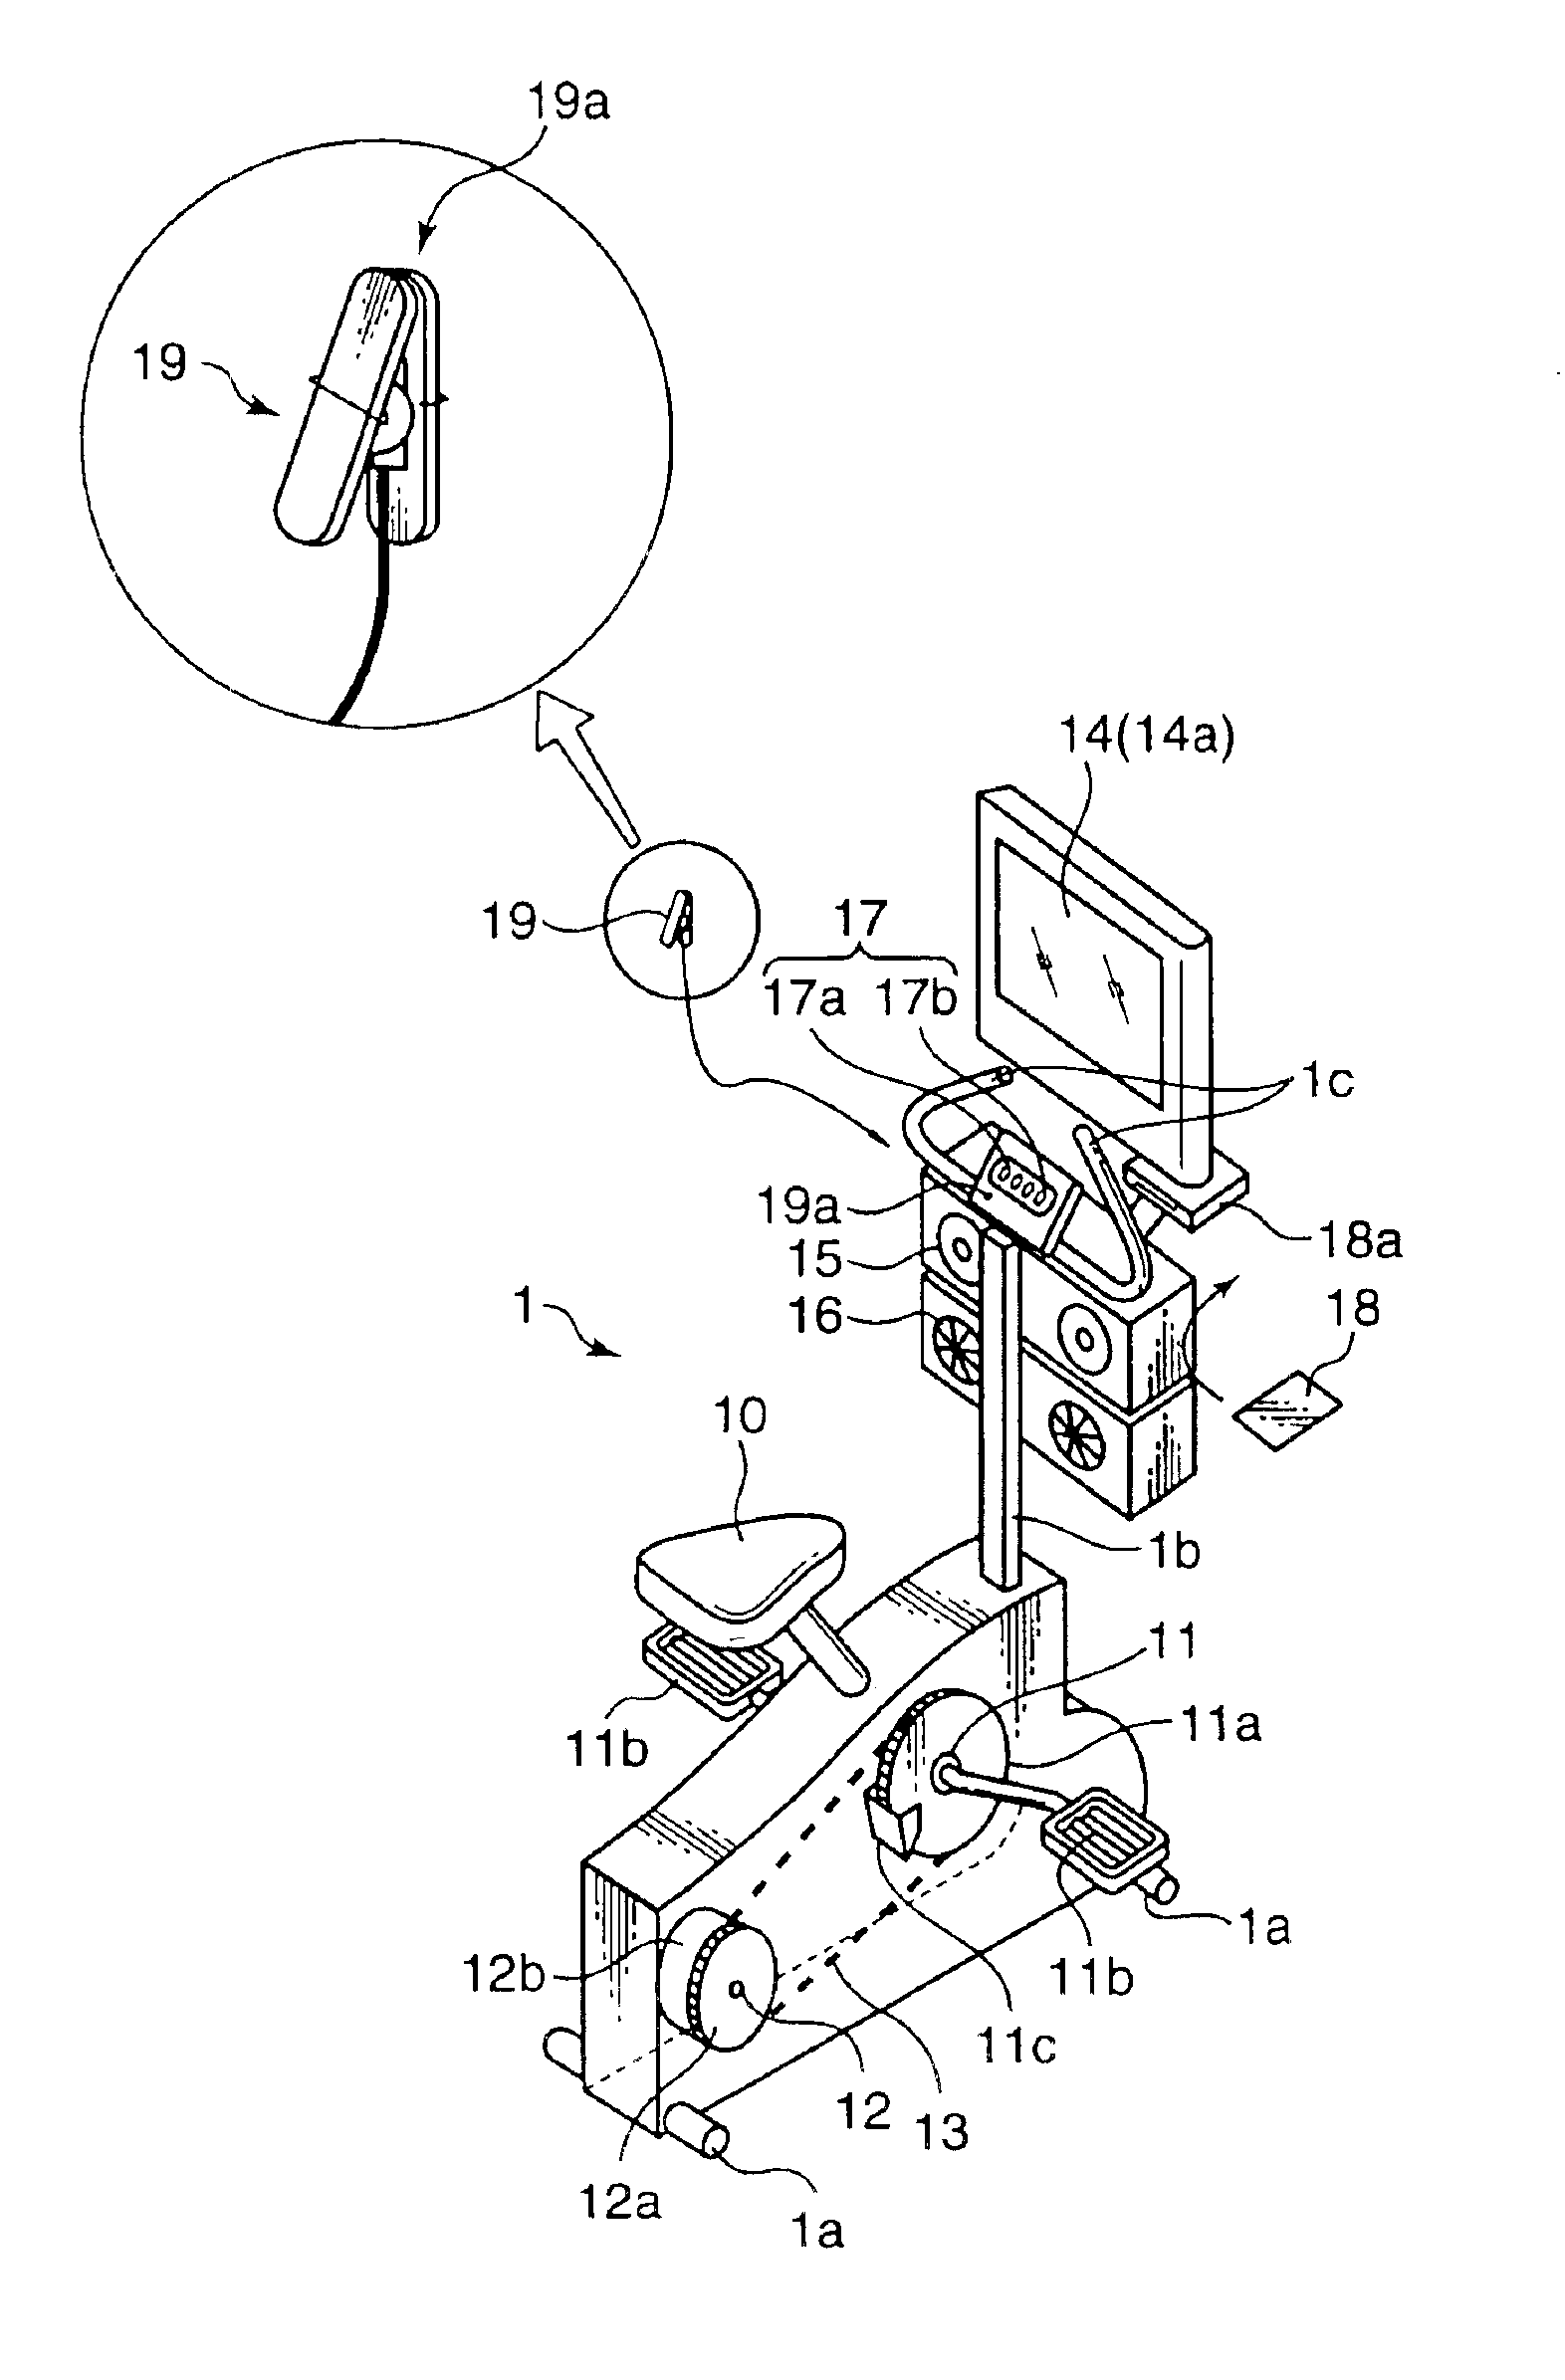 Exercise assistance apparatus